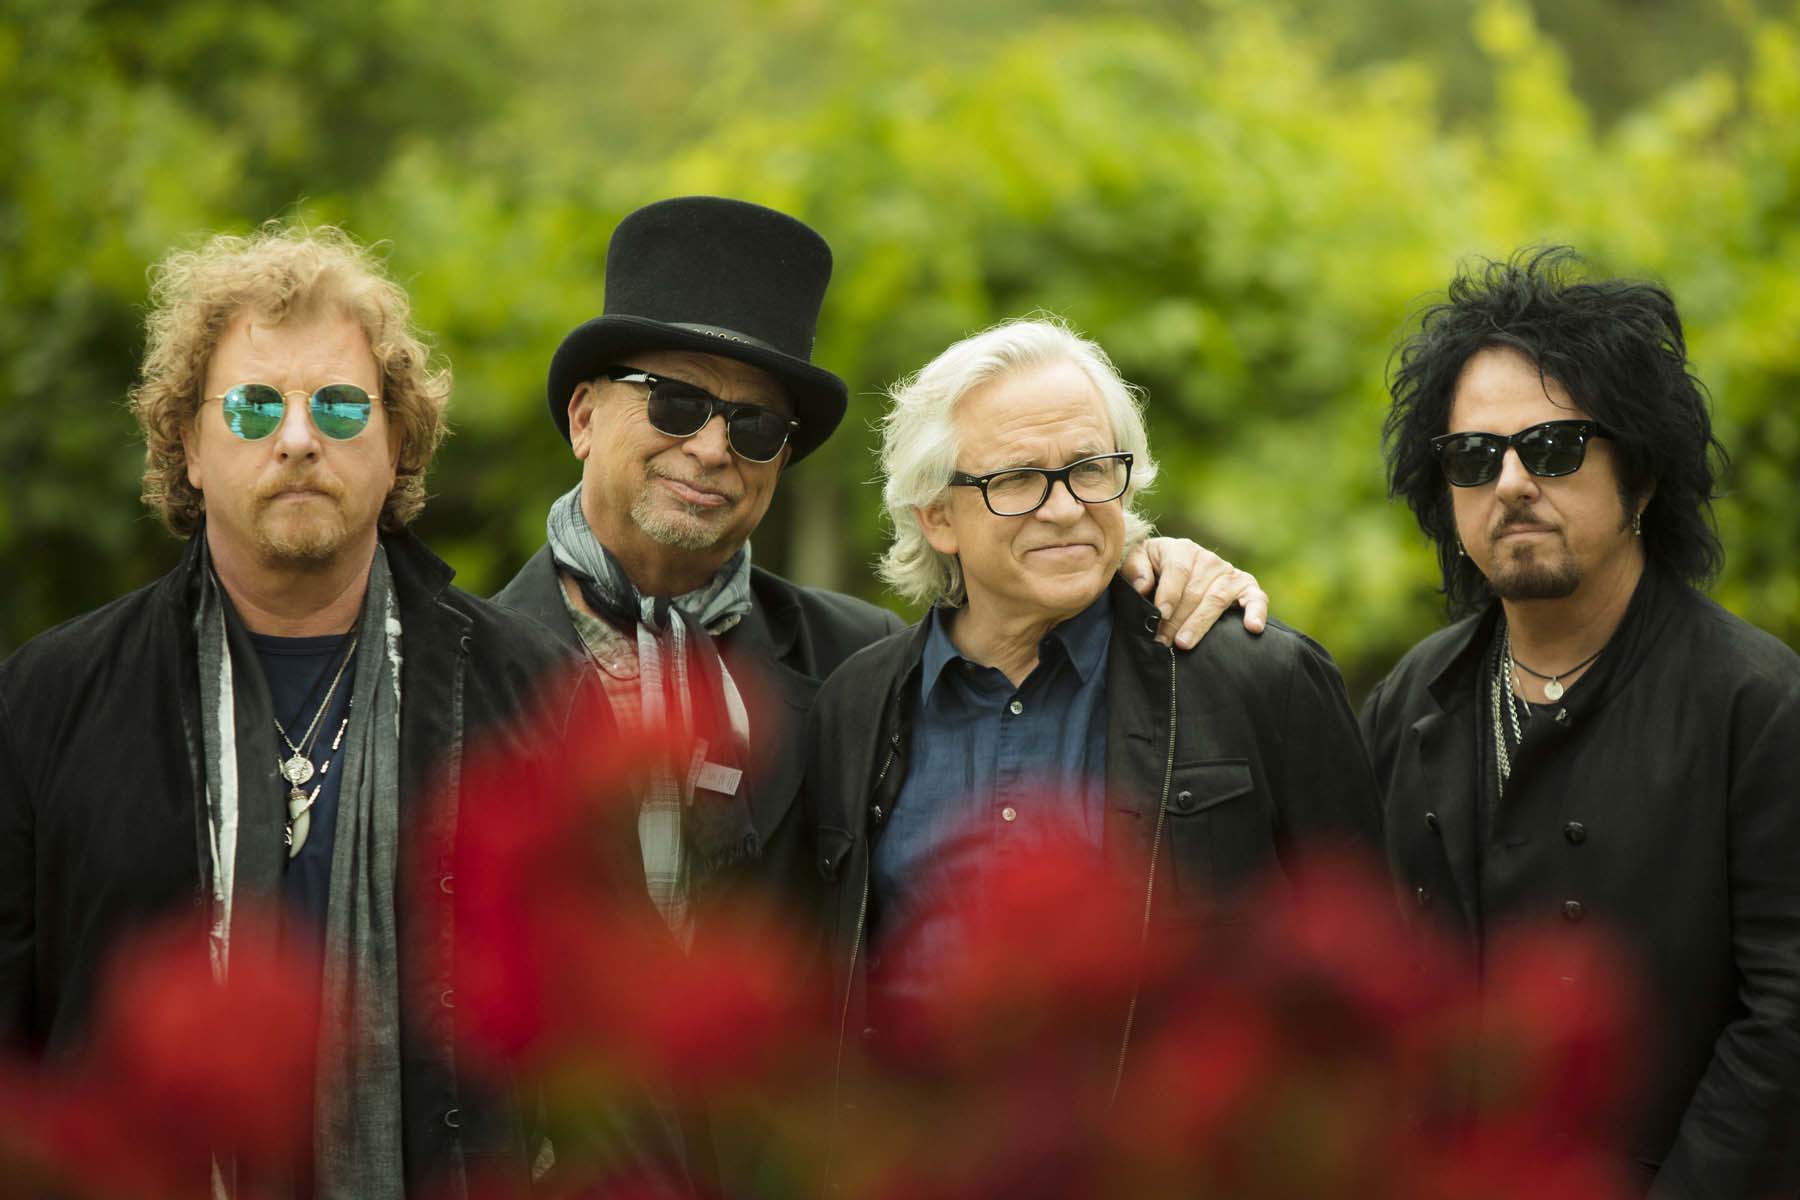 PREVIEW: Toto’s 40 Trips Around the Sun